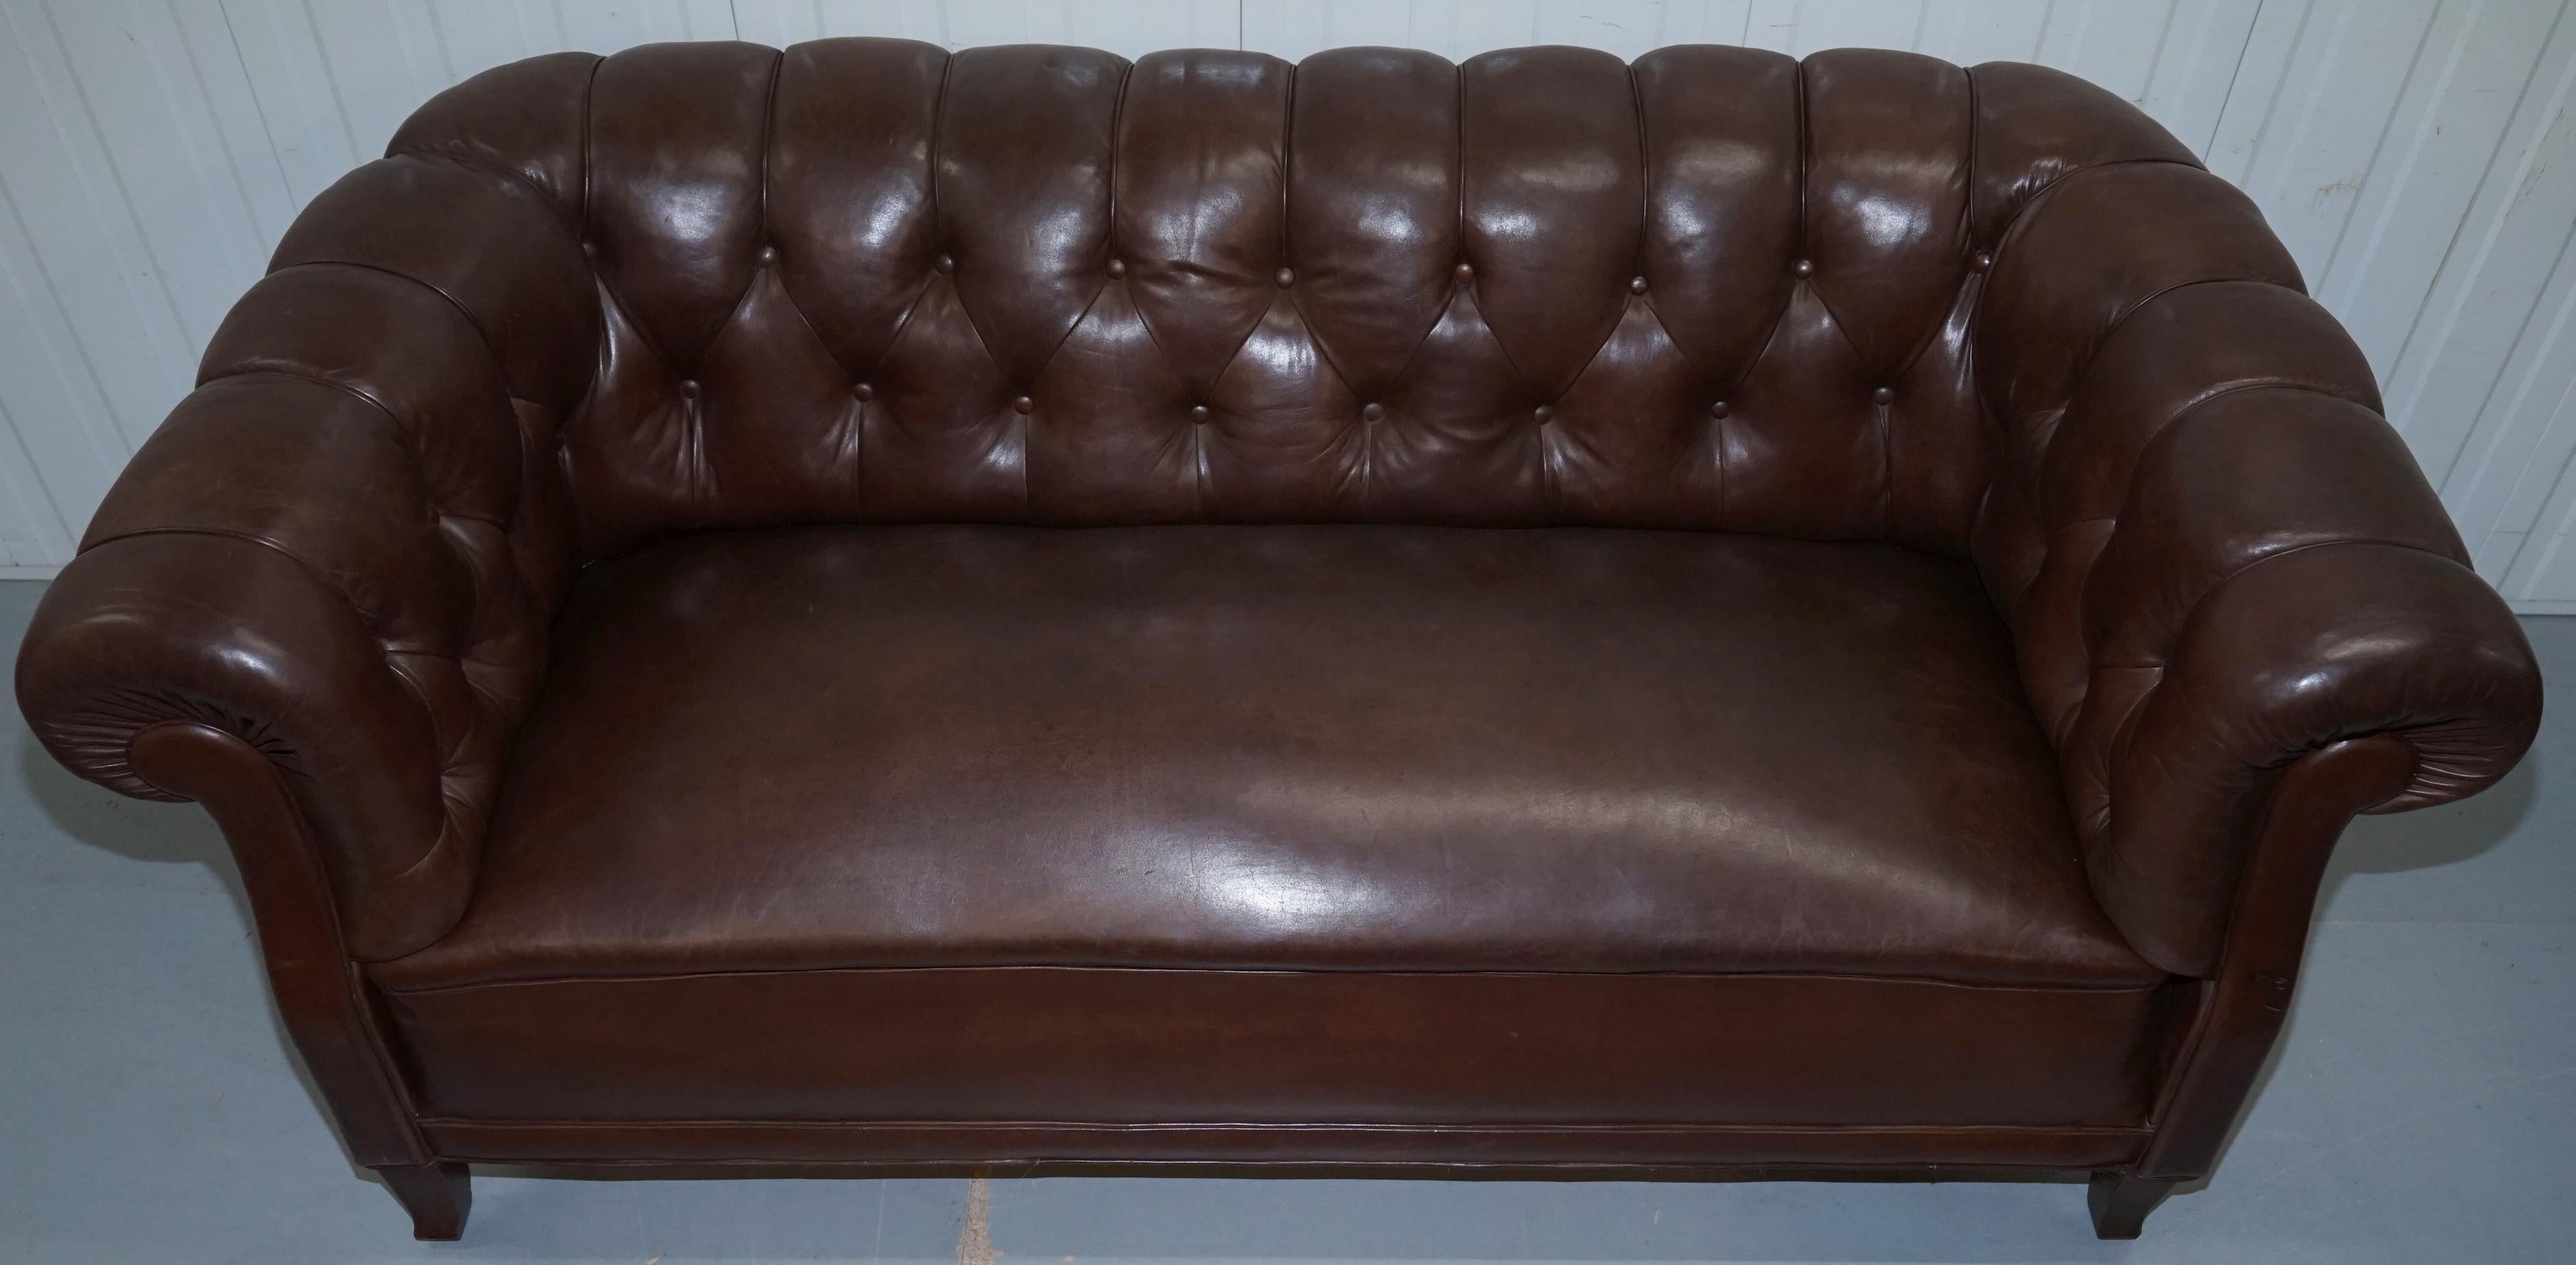 Hand-Crafted Original Victorian 1890 Swedish Aged Brown Leather Chesterfield Full Sprung Sofa